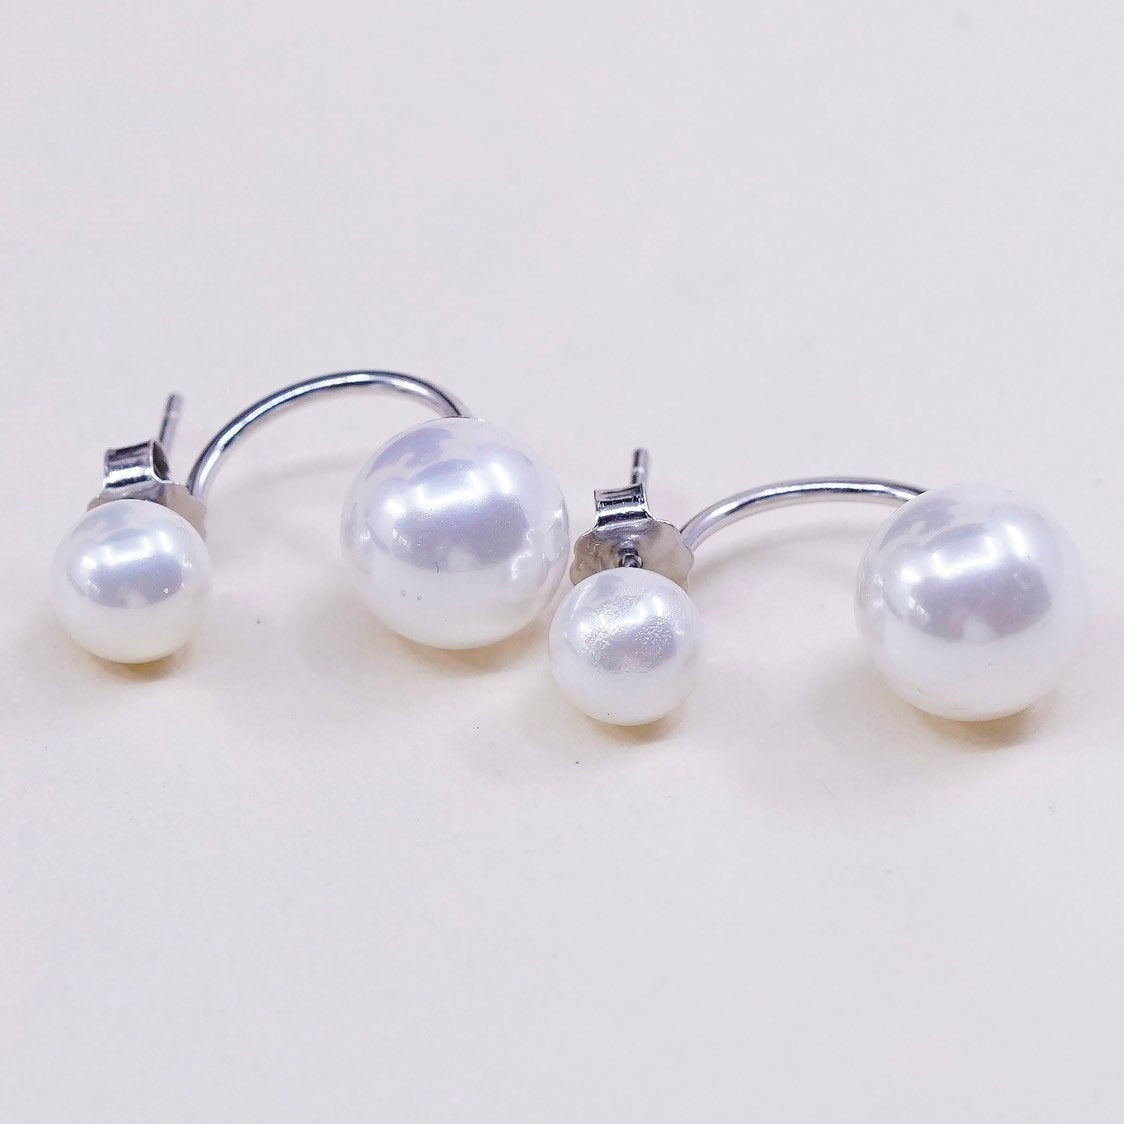 vtg Sterling silver handmade earrings, 925 silver with pearl drop, stamped 925